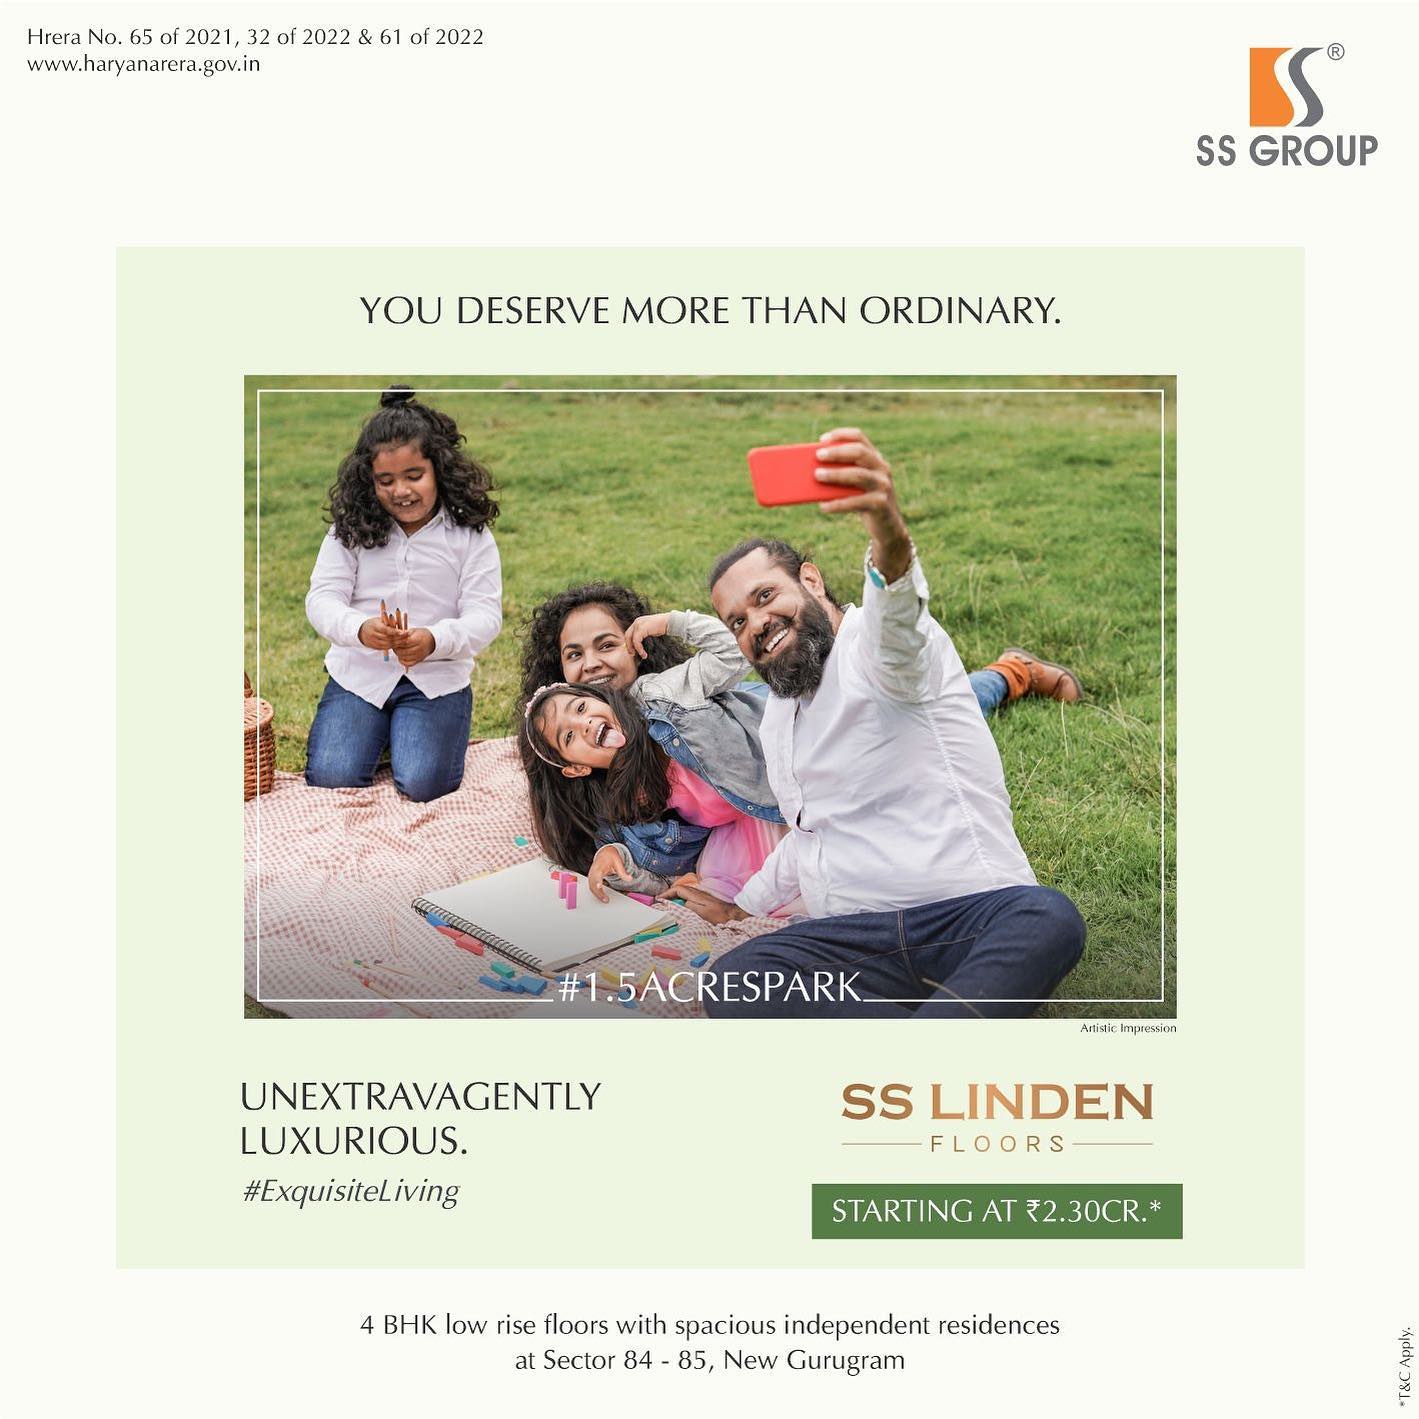 Discover the beauty of outdoors where you connect with nature’s wonders at SS Linden Floors in Sector 84, Gurgaon